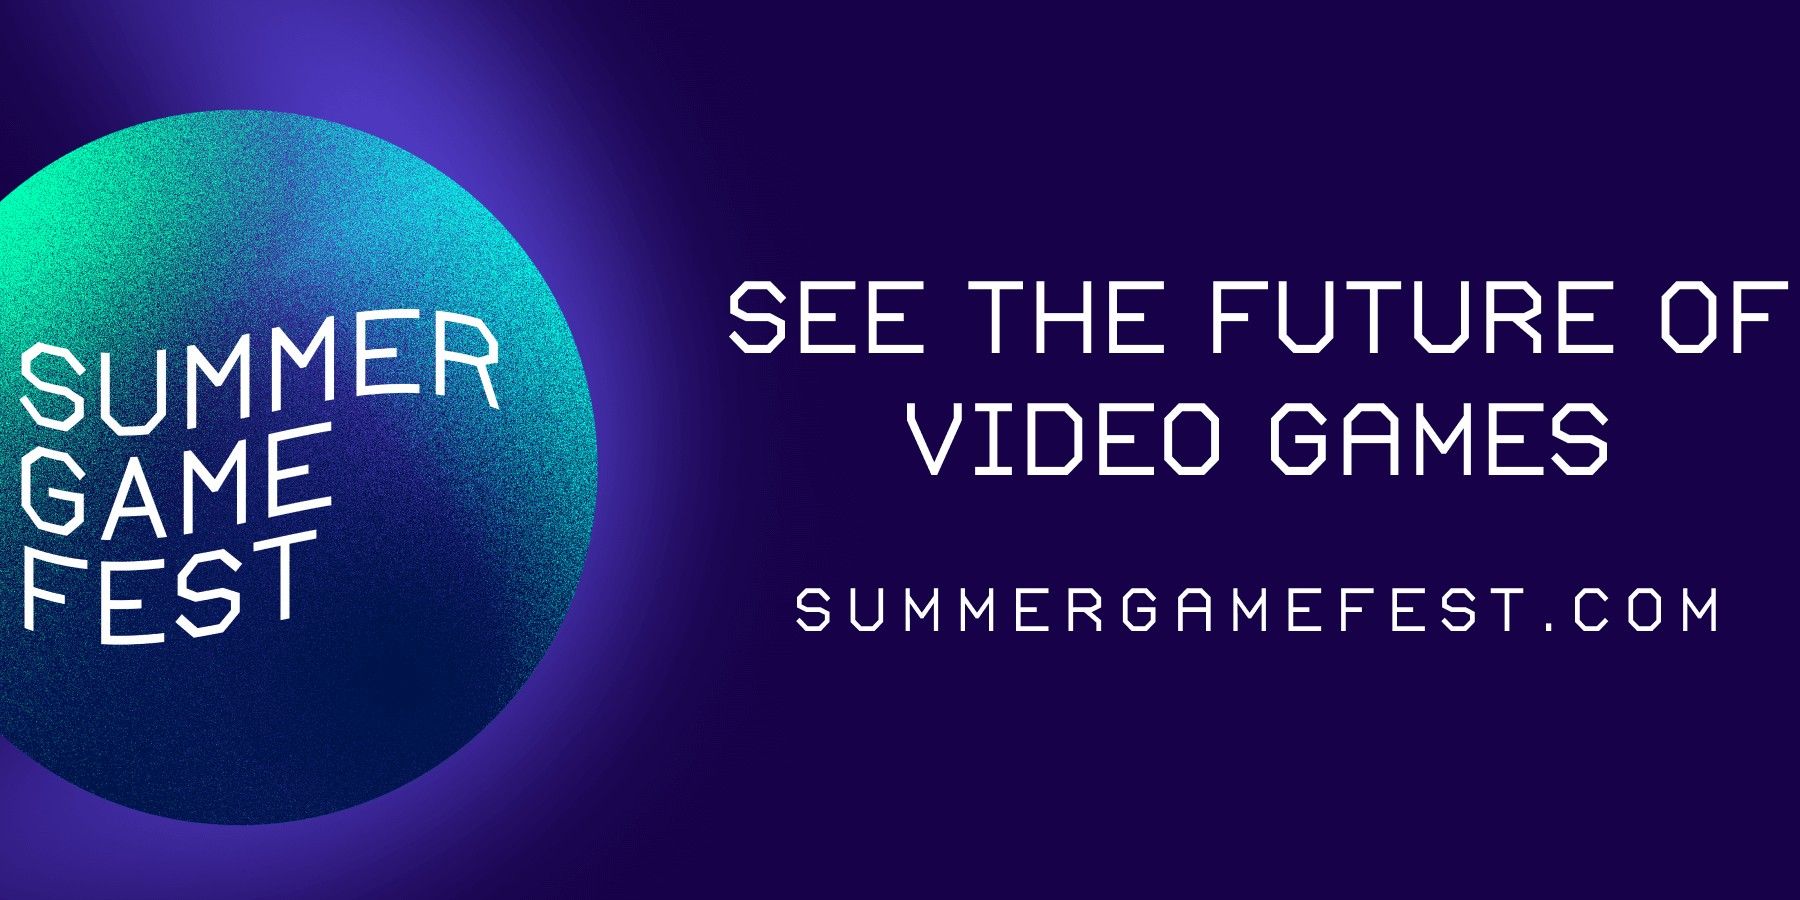 Summer Game Fest Confirms Over 30 Partners for This Year's Events